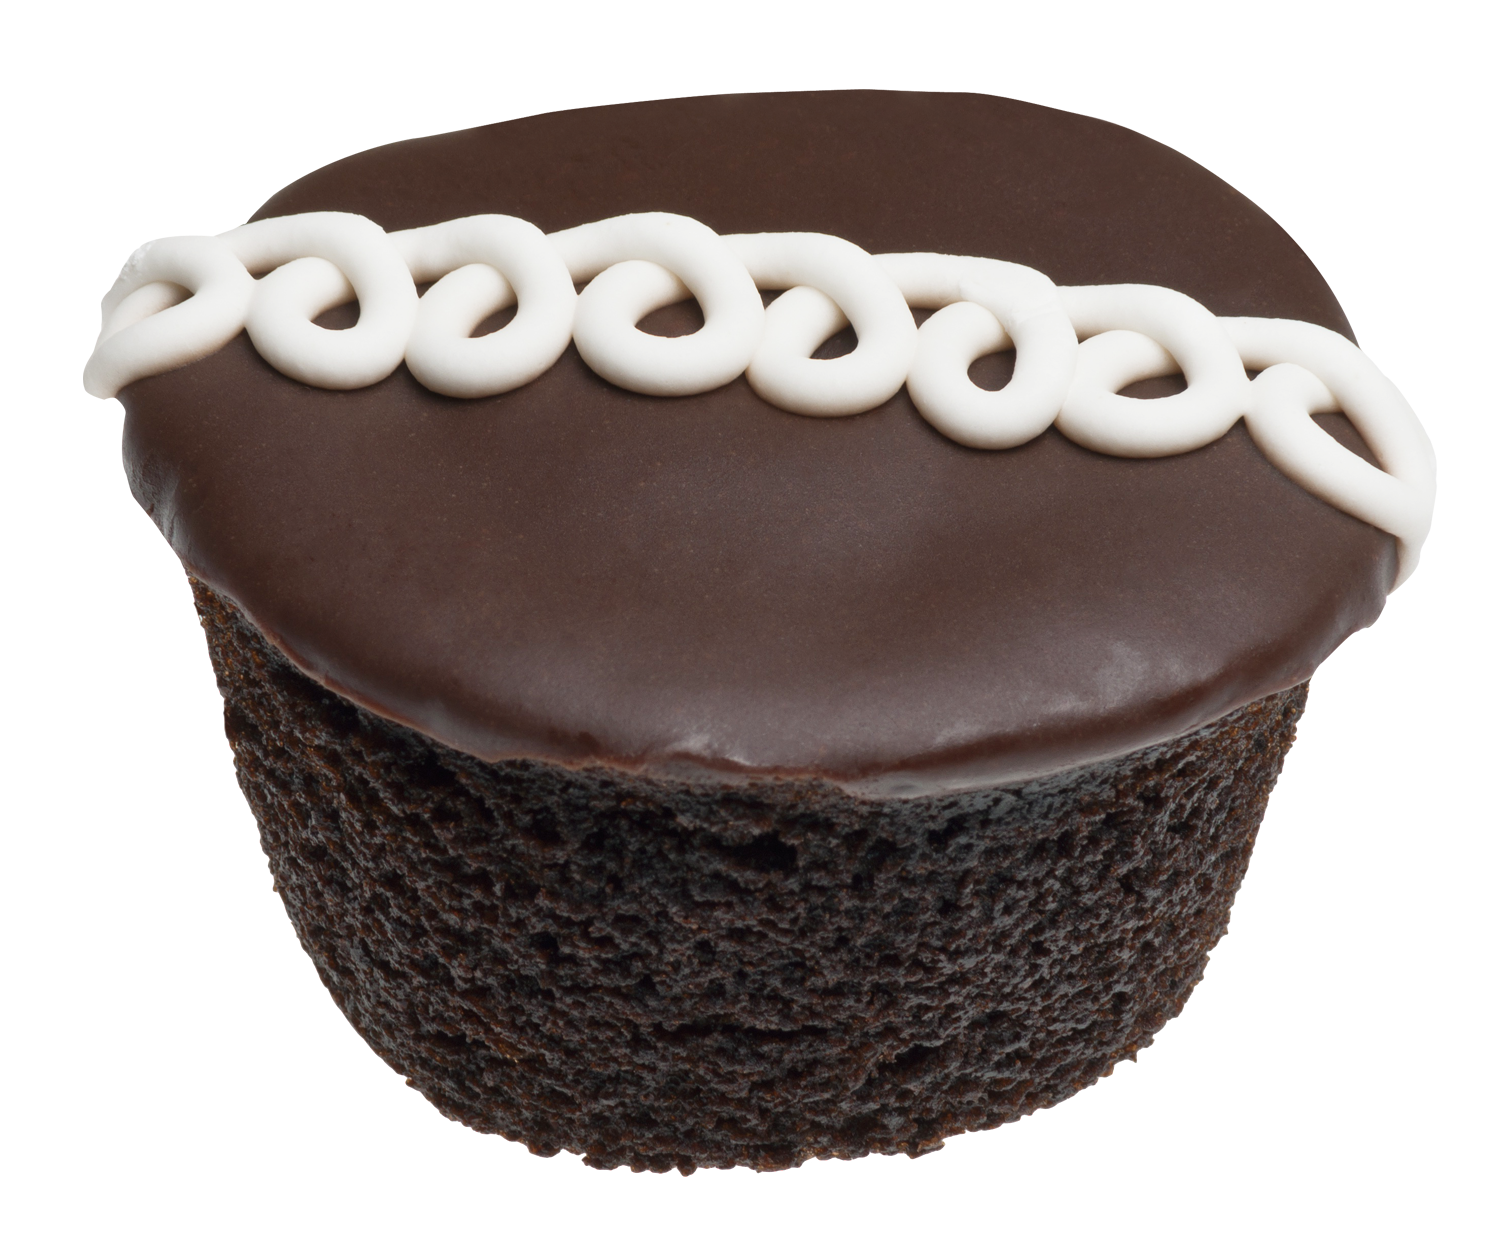 A Chocolate Cupcake With White Frosting